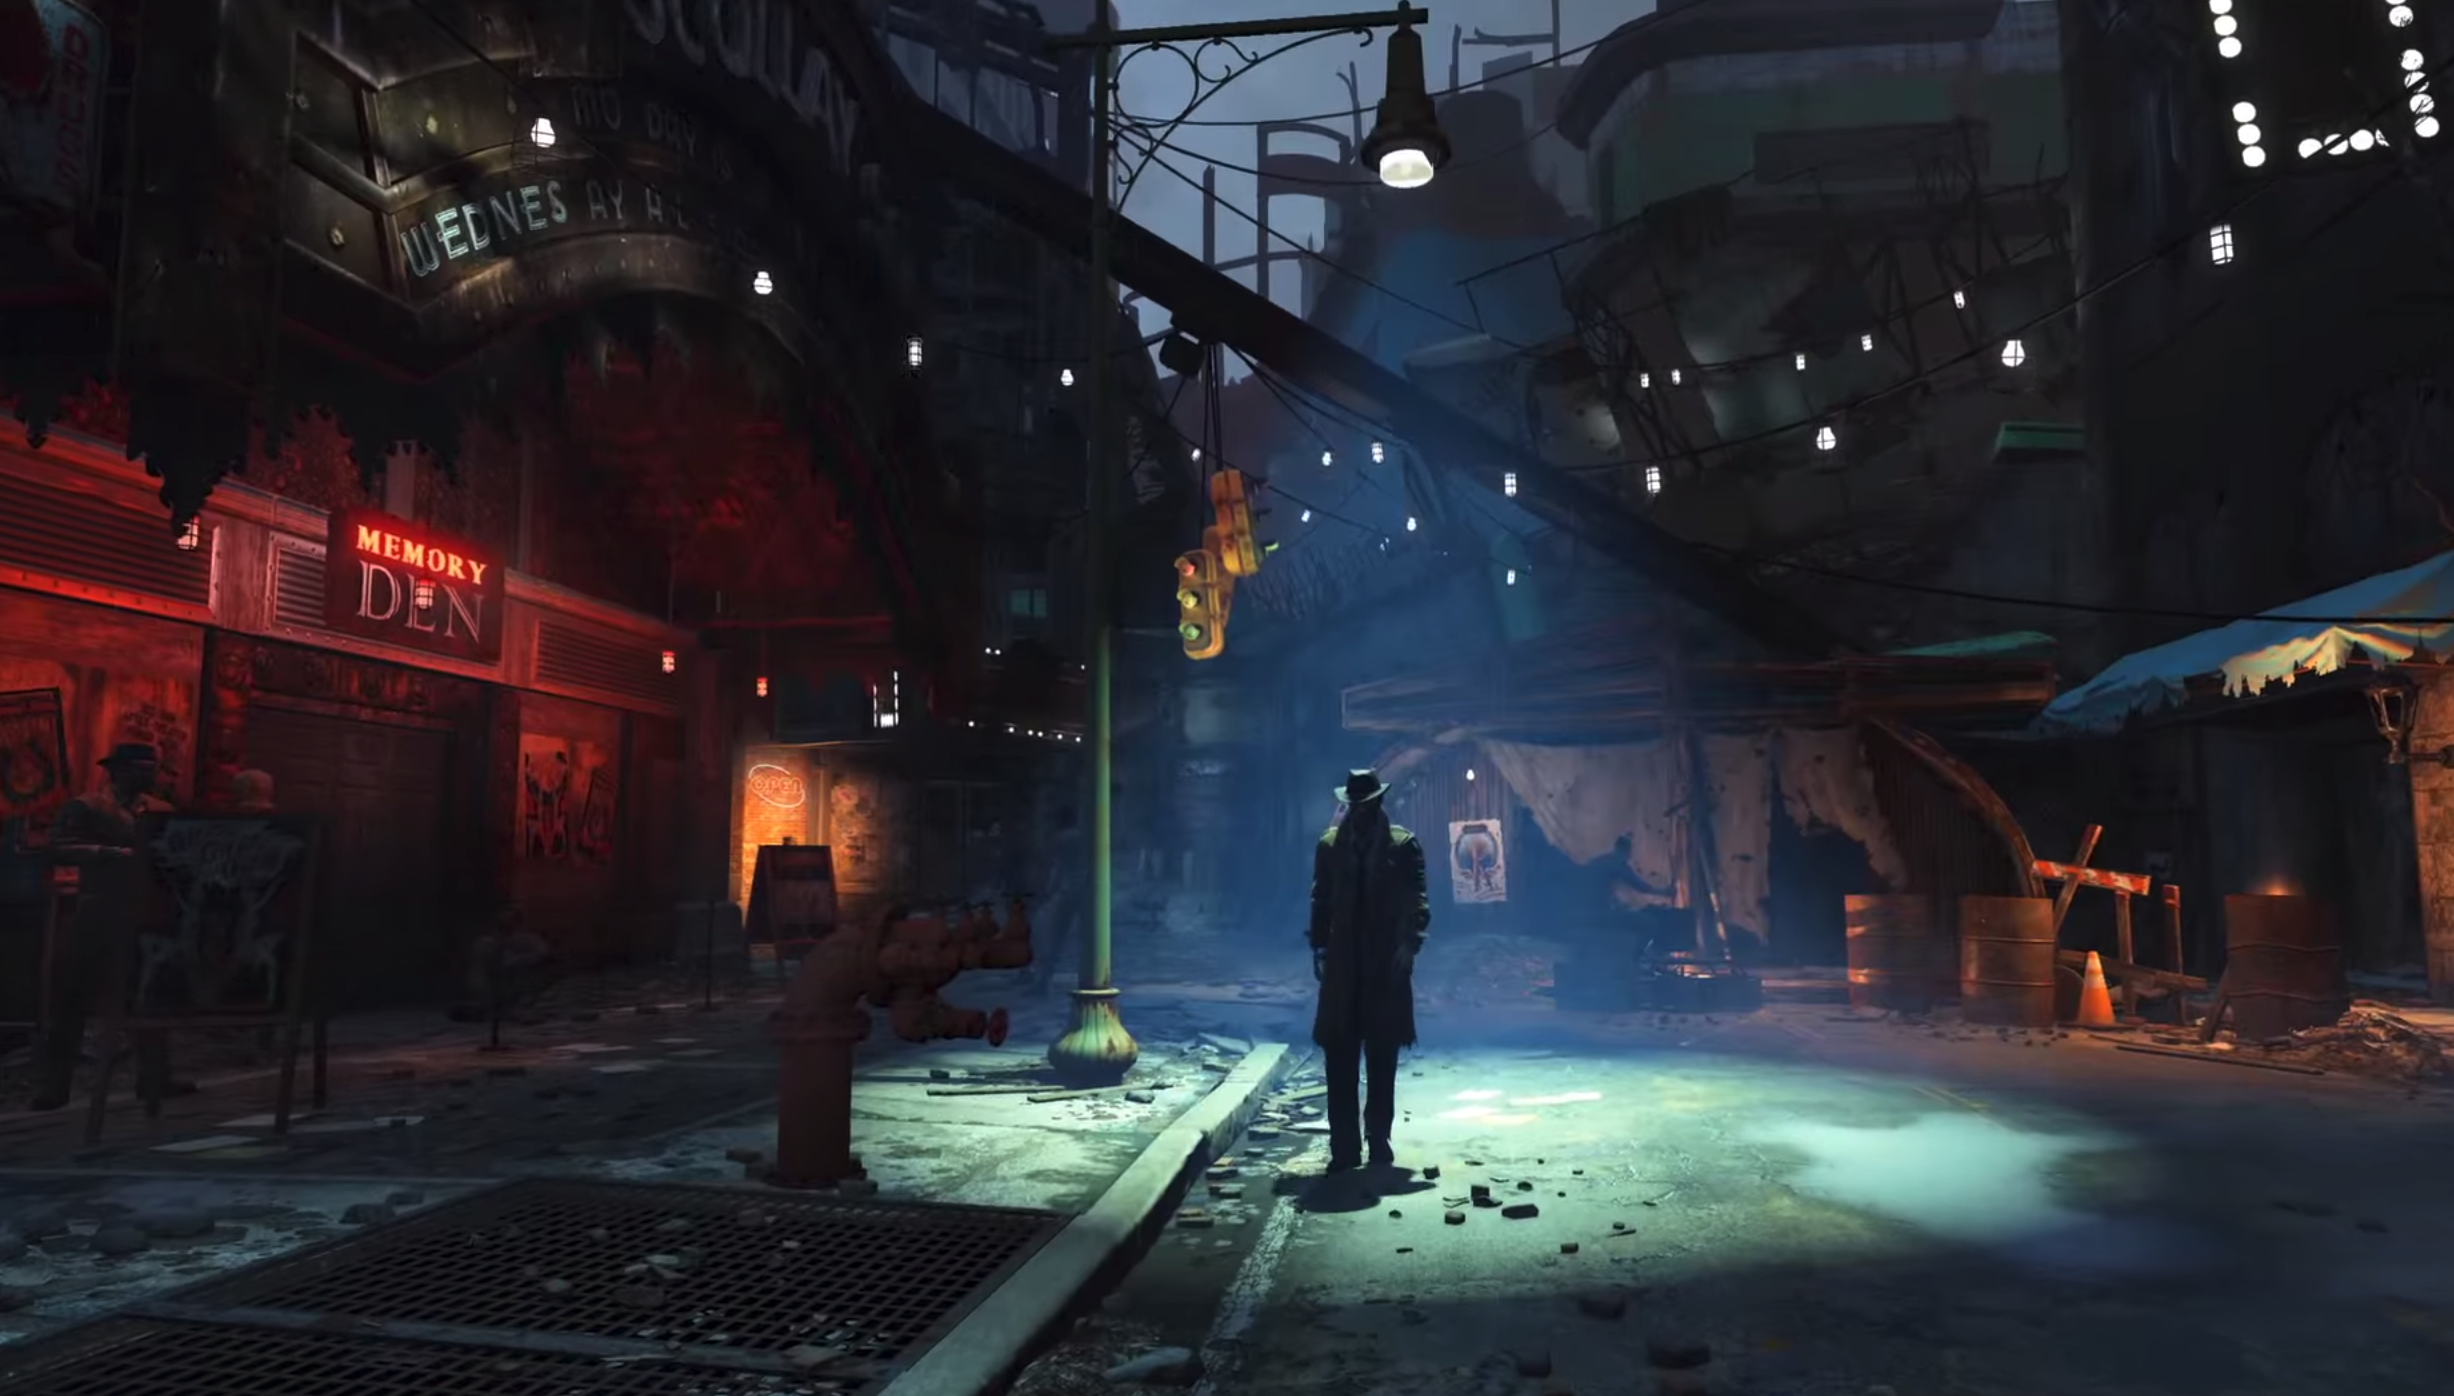 Fallout 4 for One and PC with debut trailer